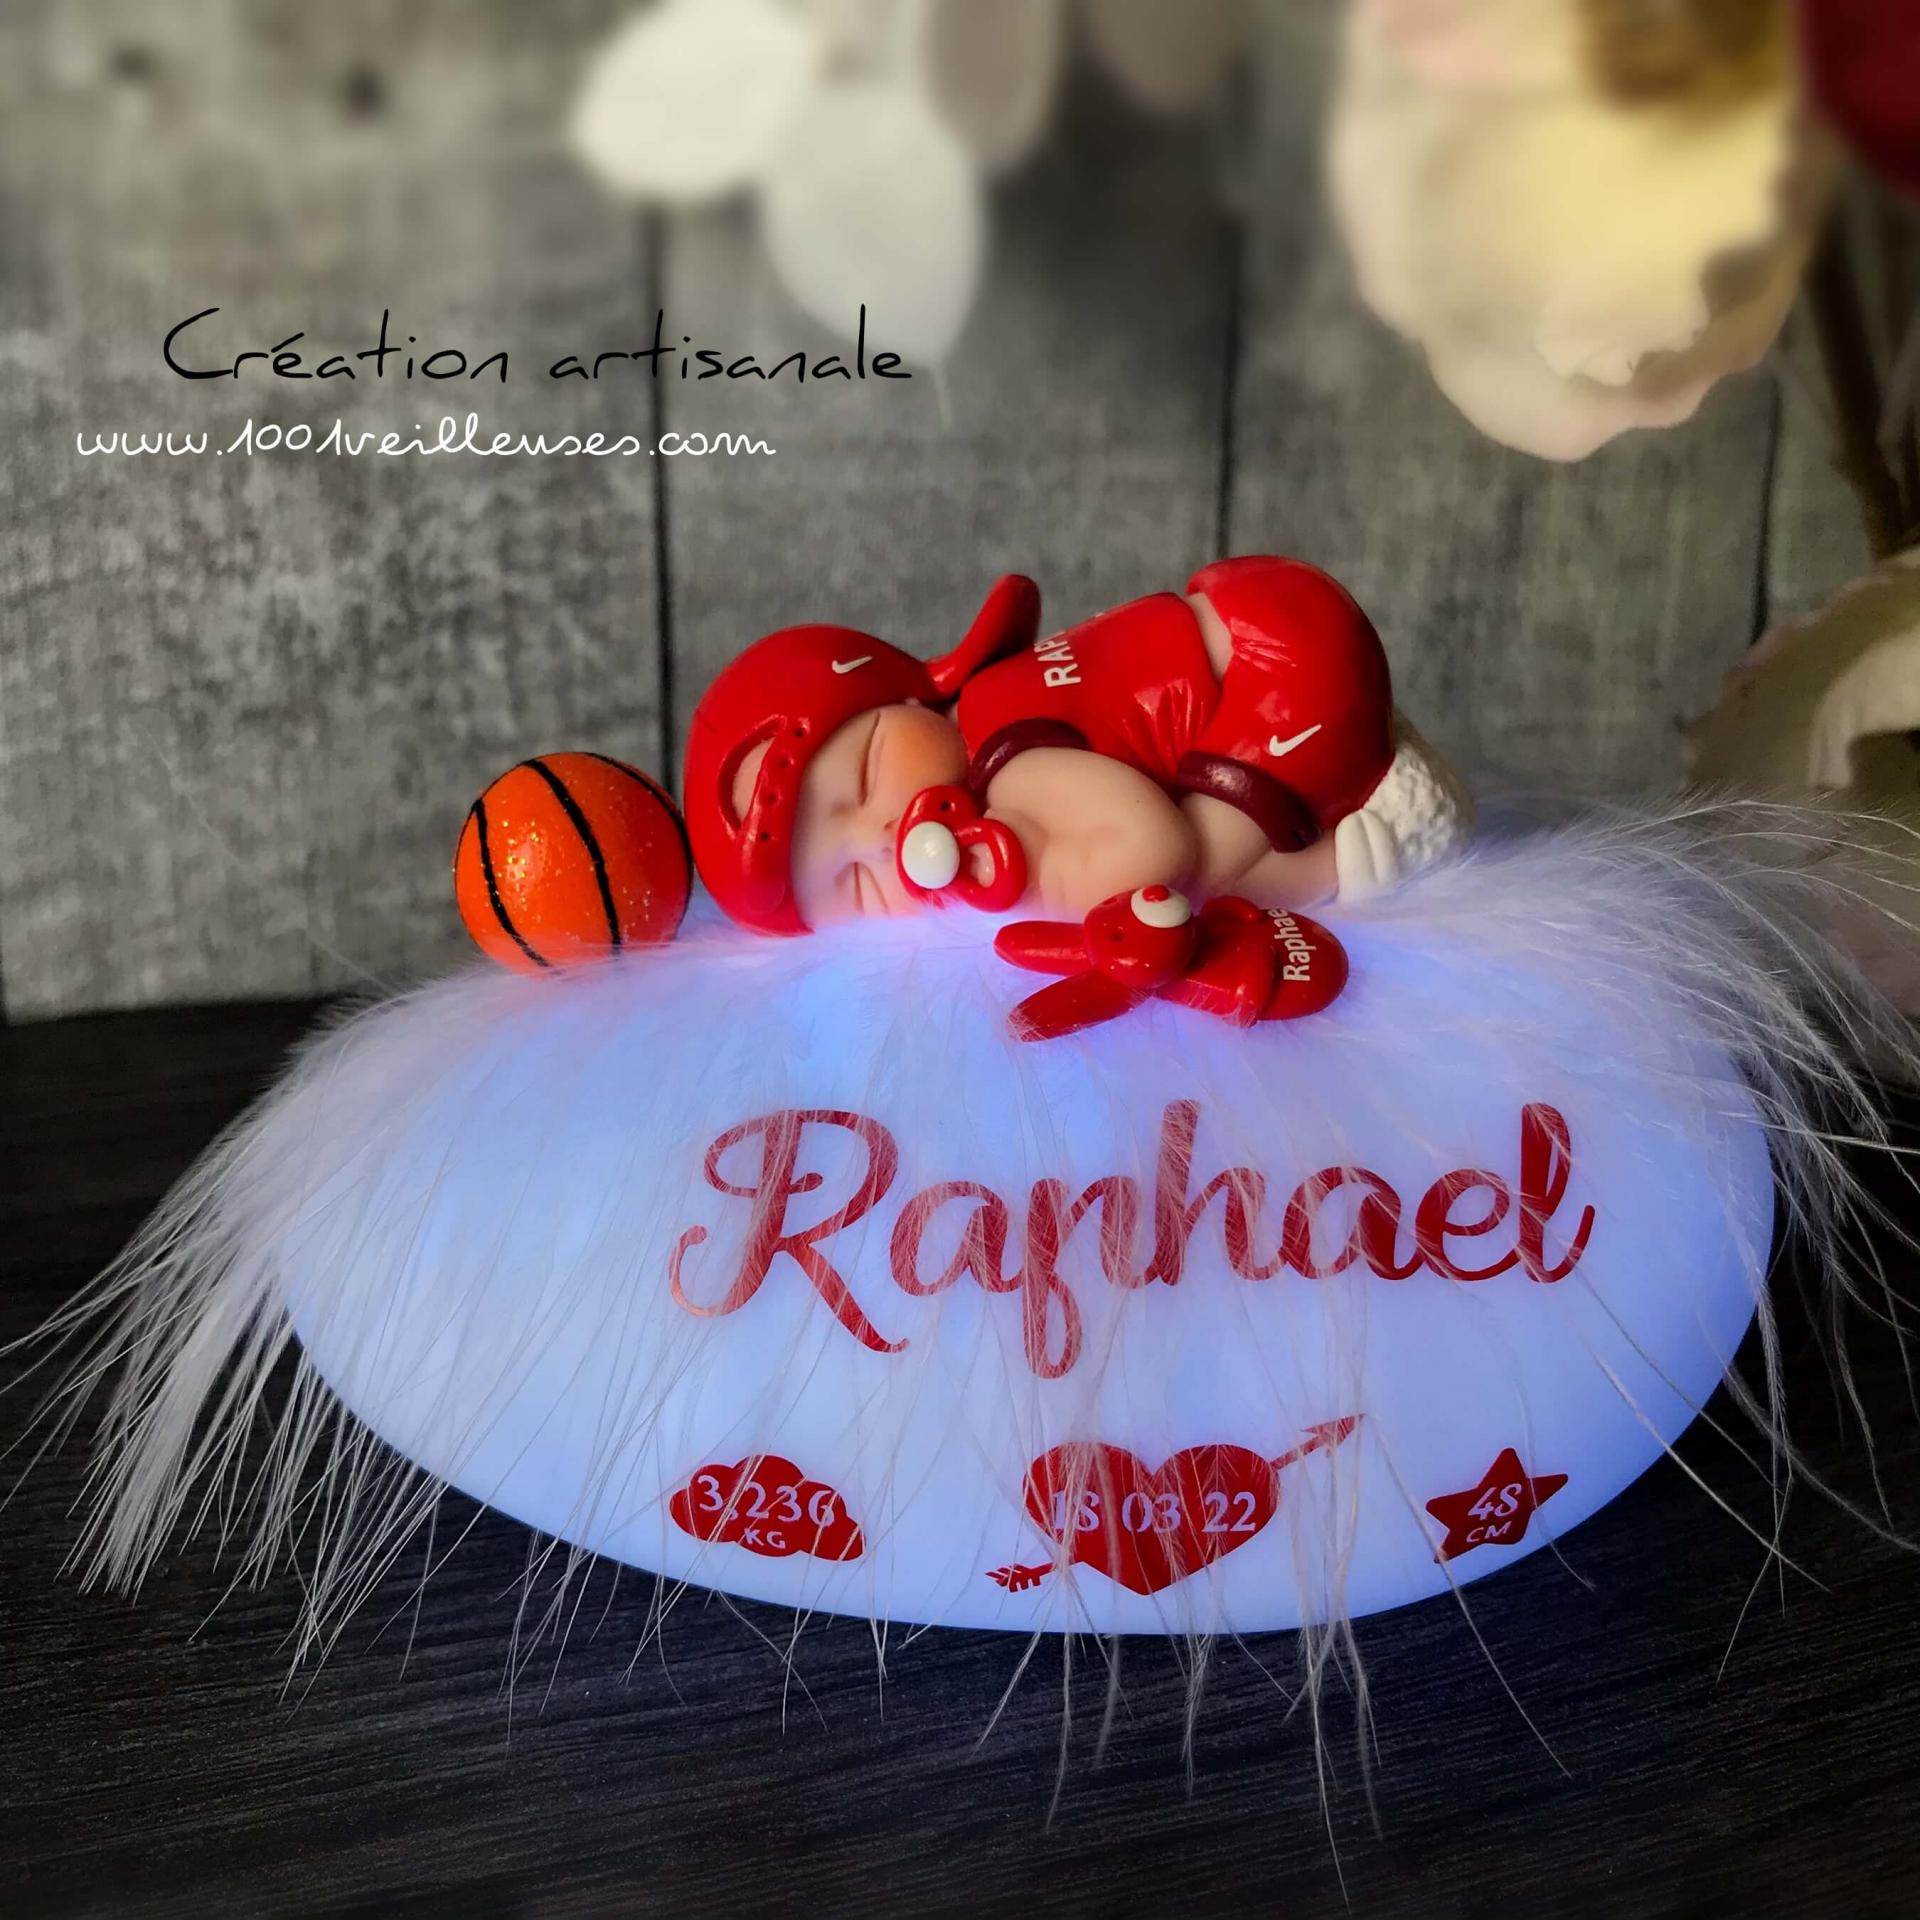 Handcrafted illuminated baby boy night light made from polymer clay with a basketball theme, featuring a customized jersey and accompanied by a stuffed animal